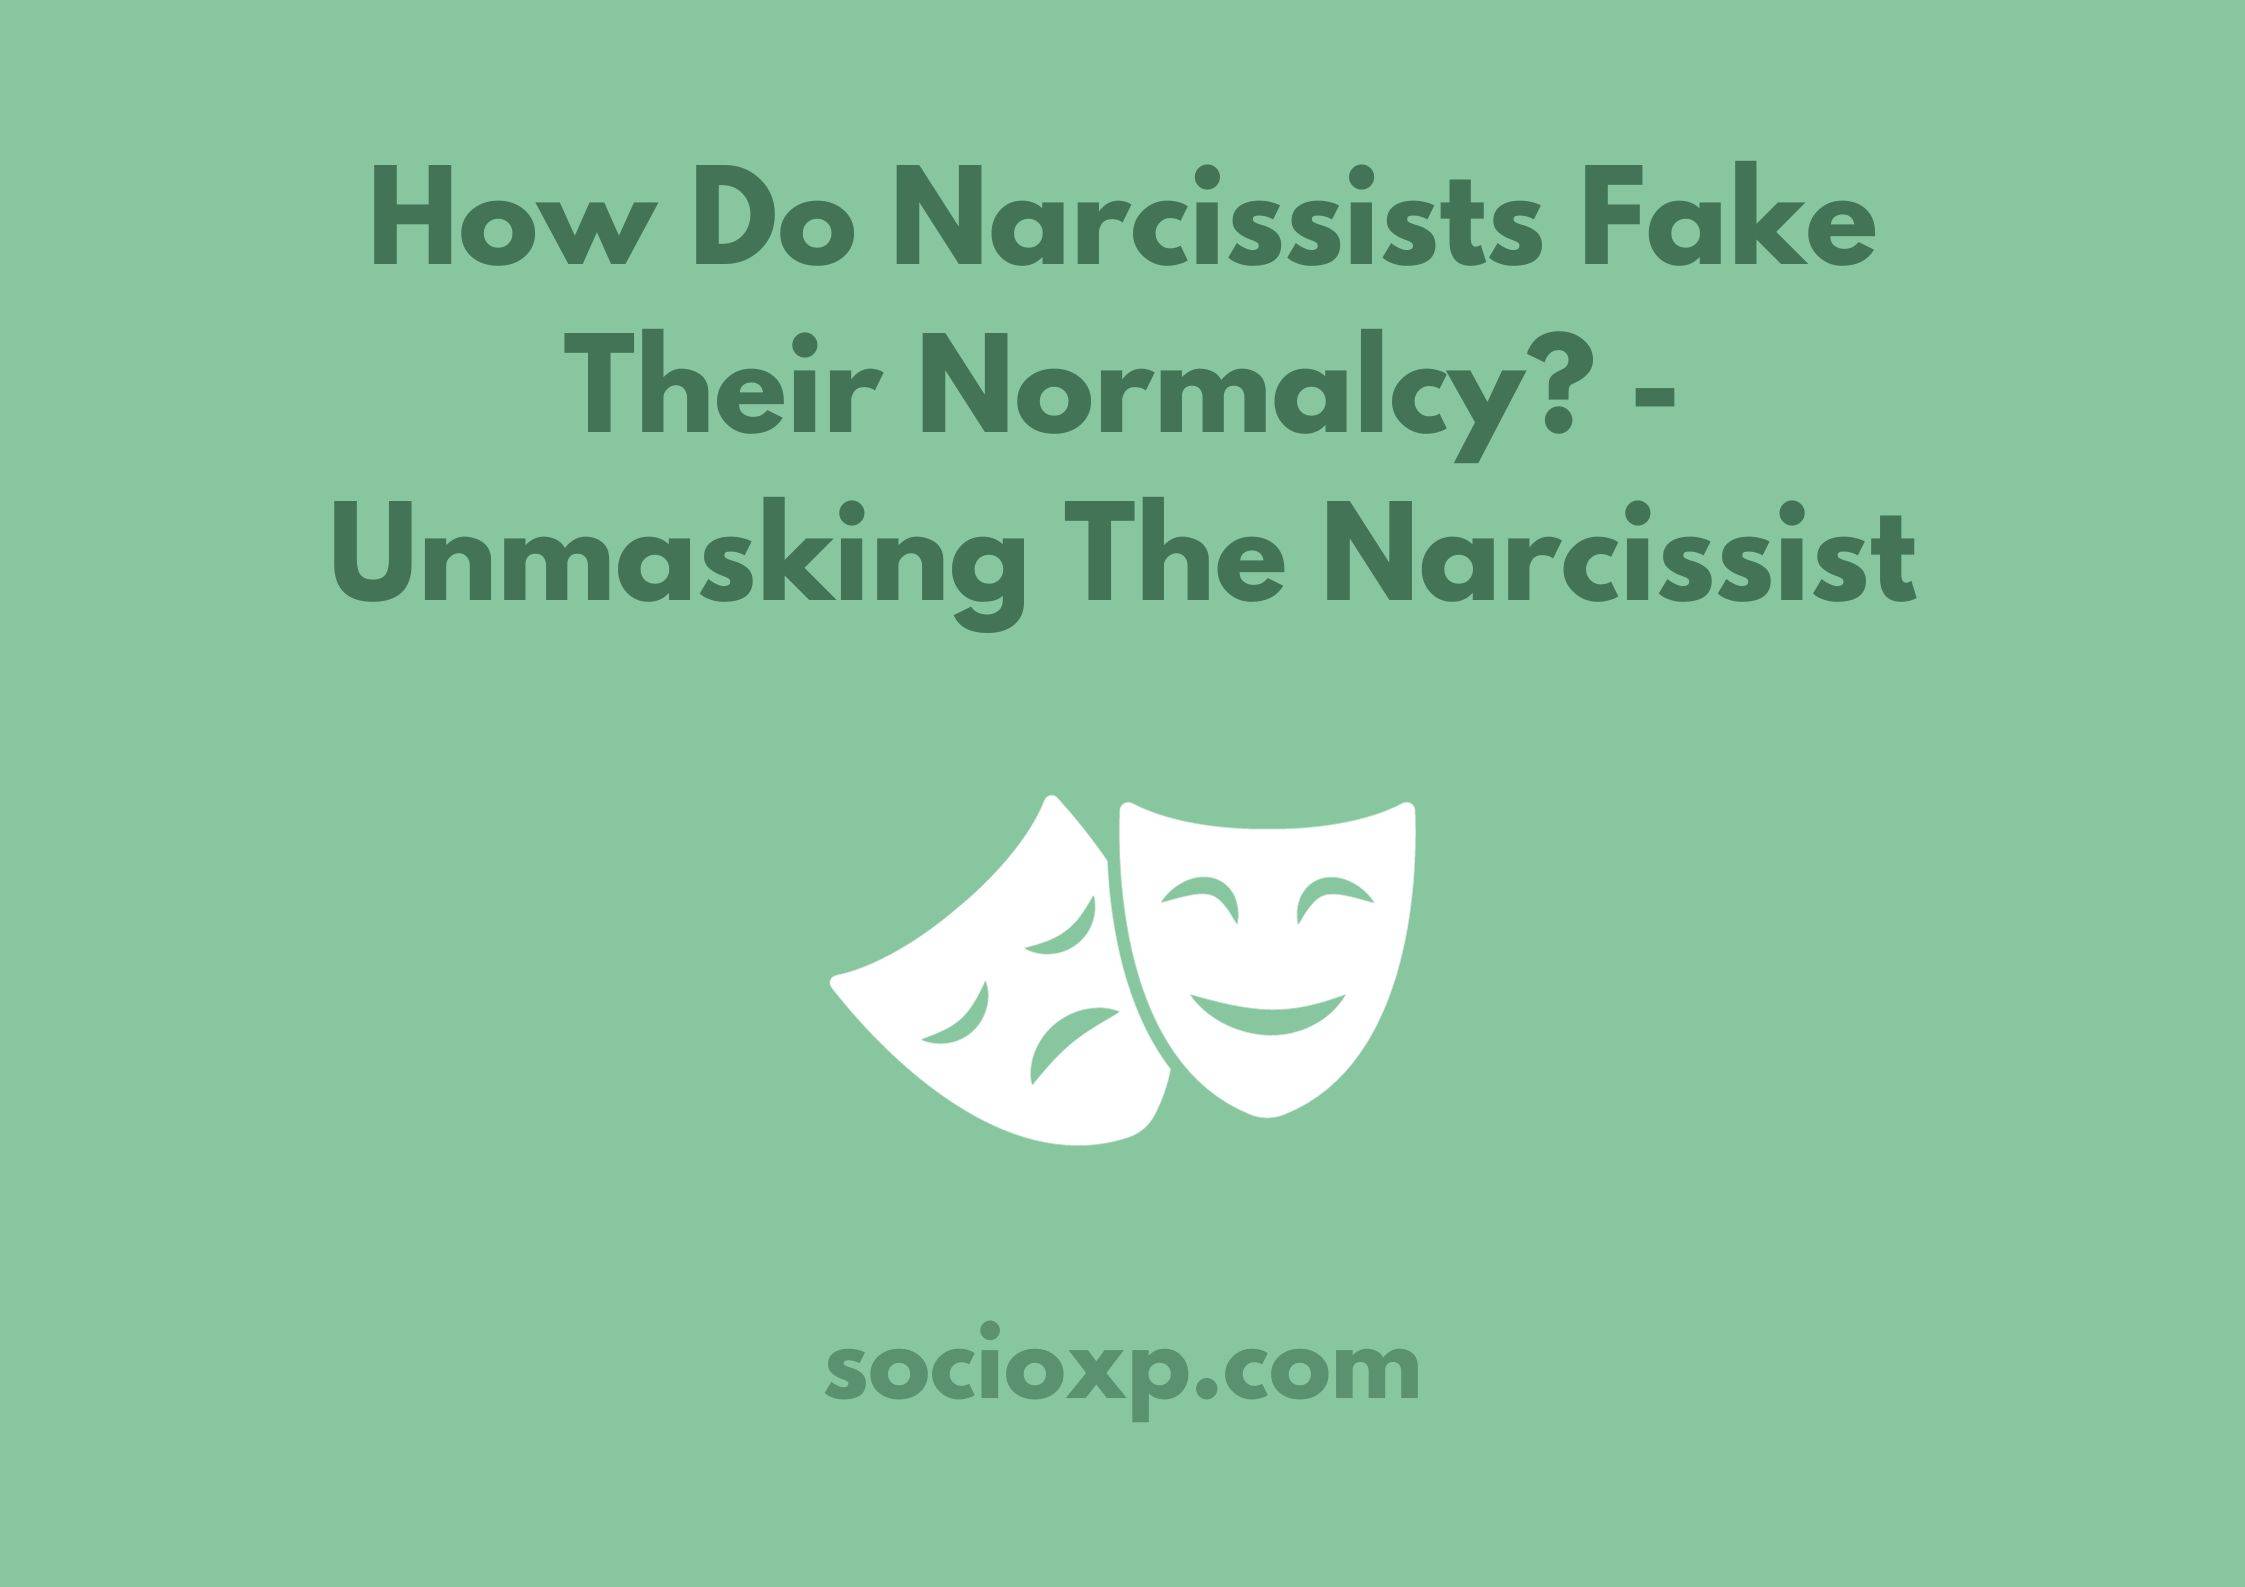 How Do Narcissists Fake Their Normalcy? - Unmasking The Narcissist